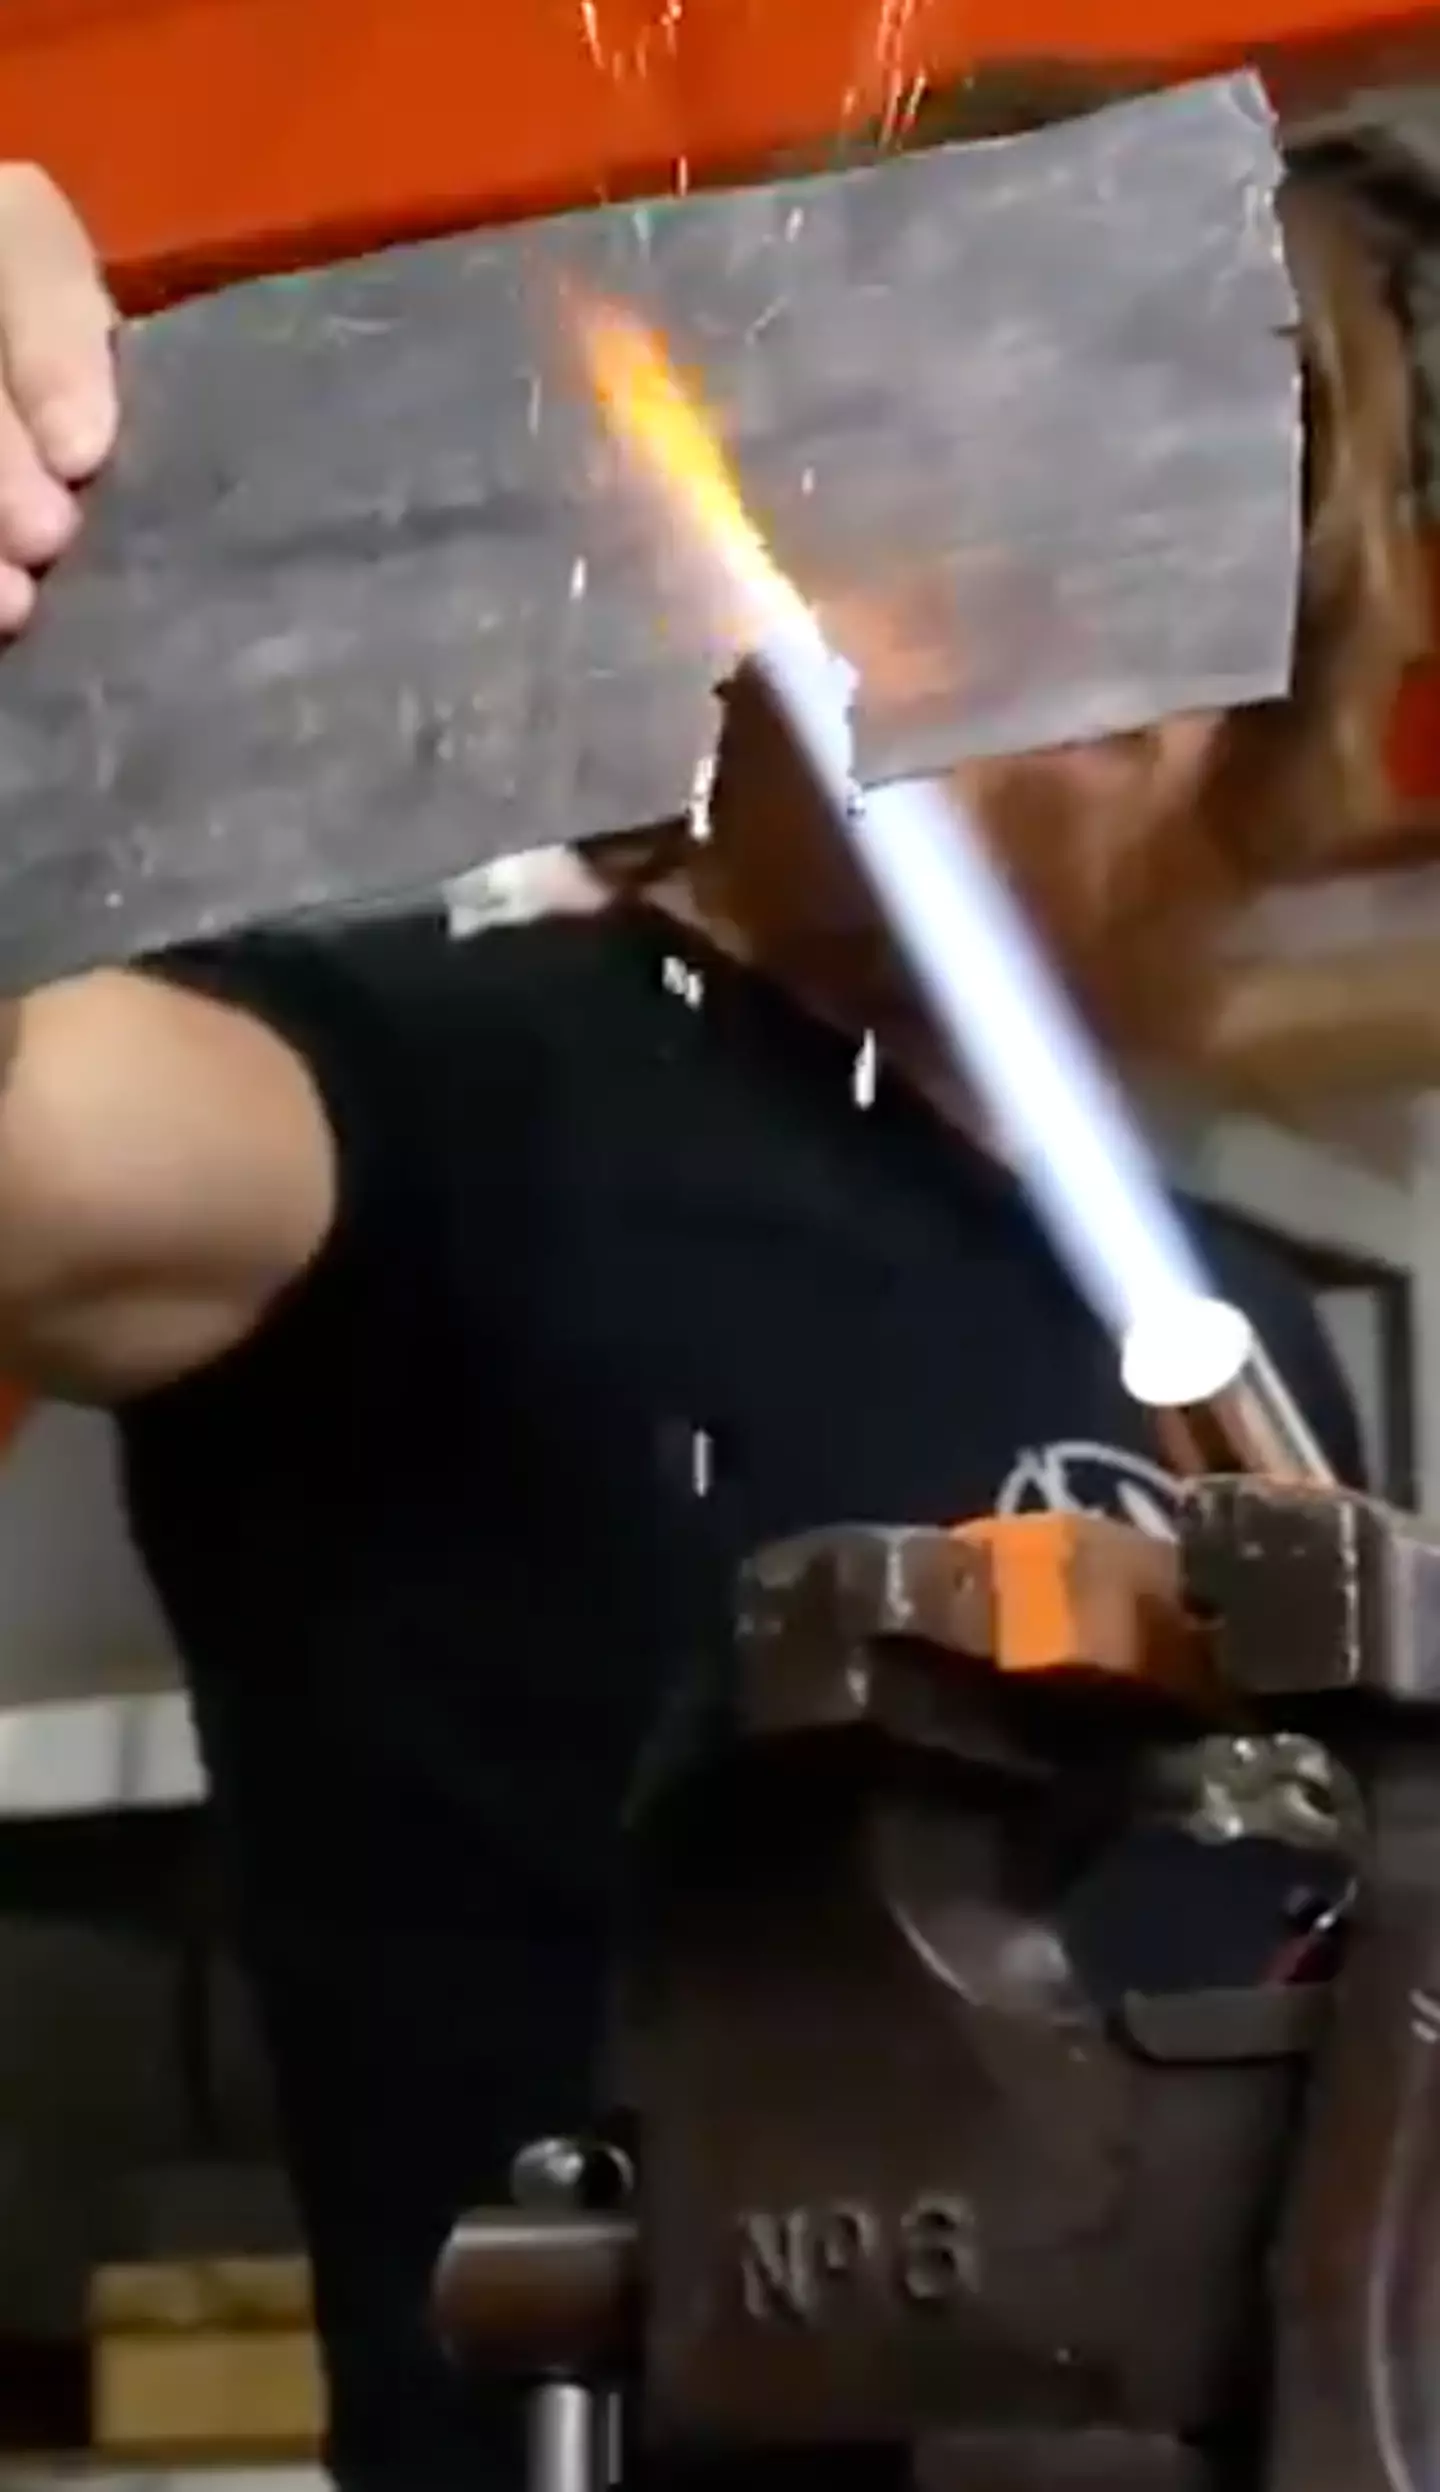 The tool cuts through steel.